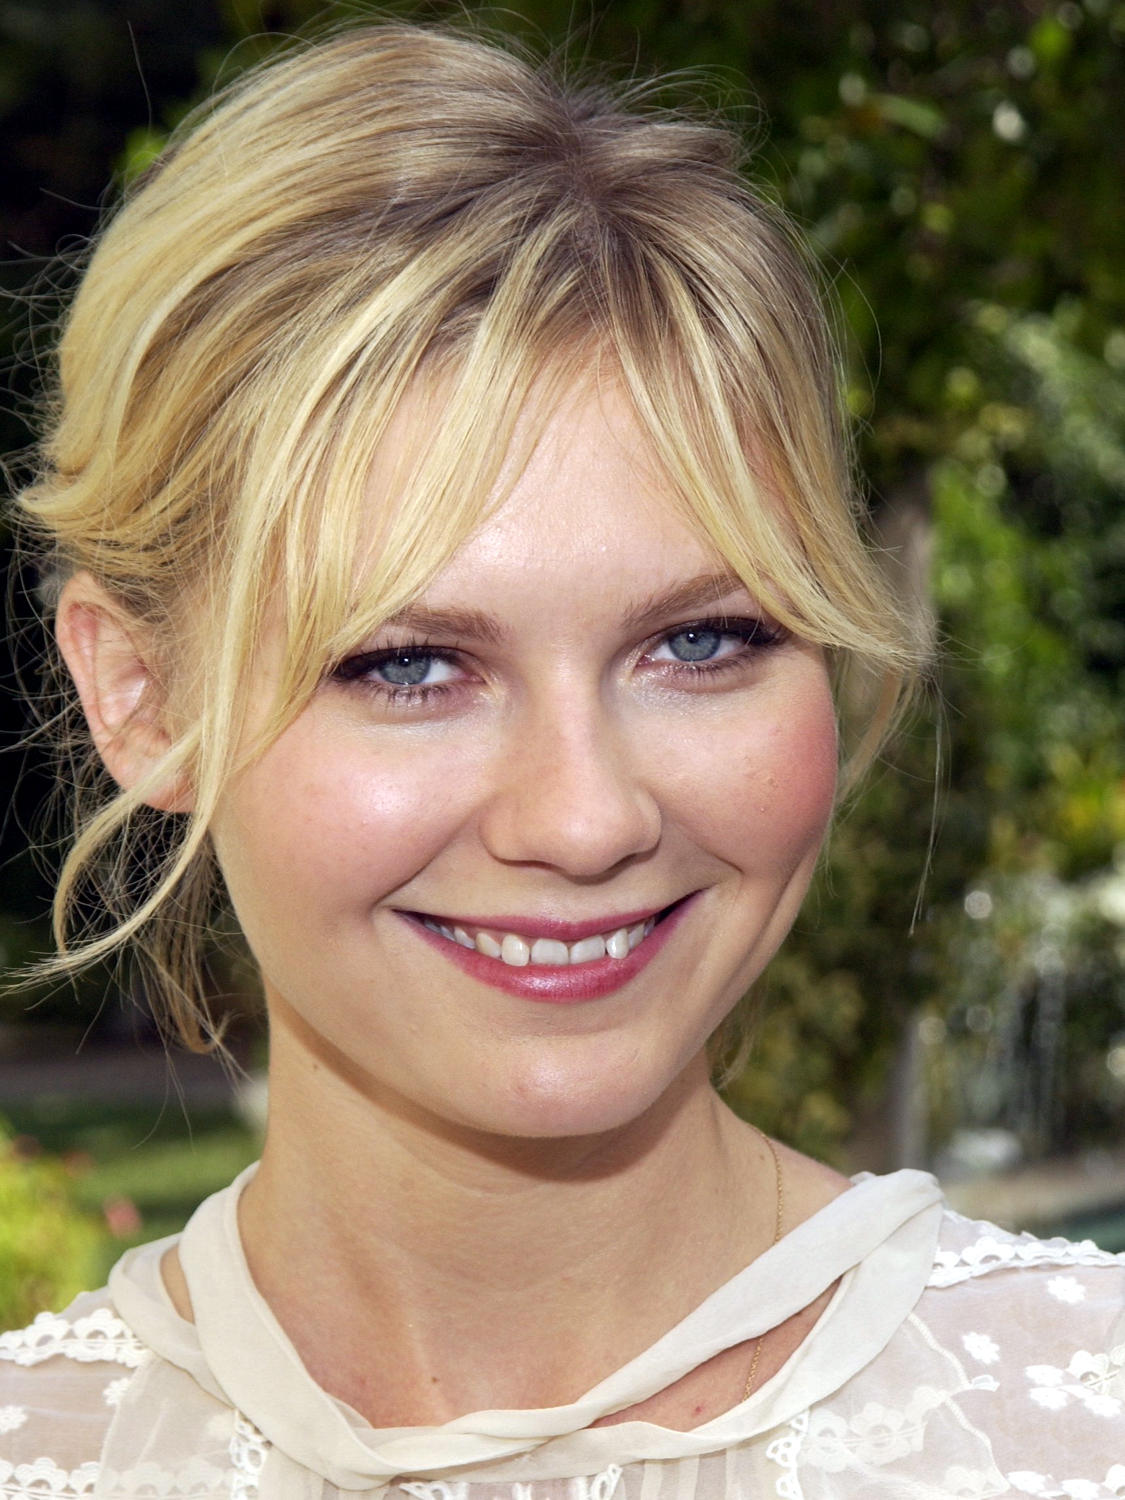 A View from the Beach Rule 5 Saturday Kirsten Dunst "I Love My